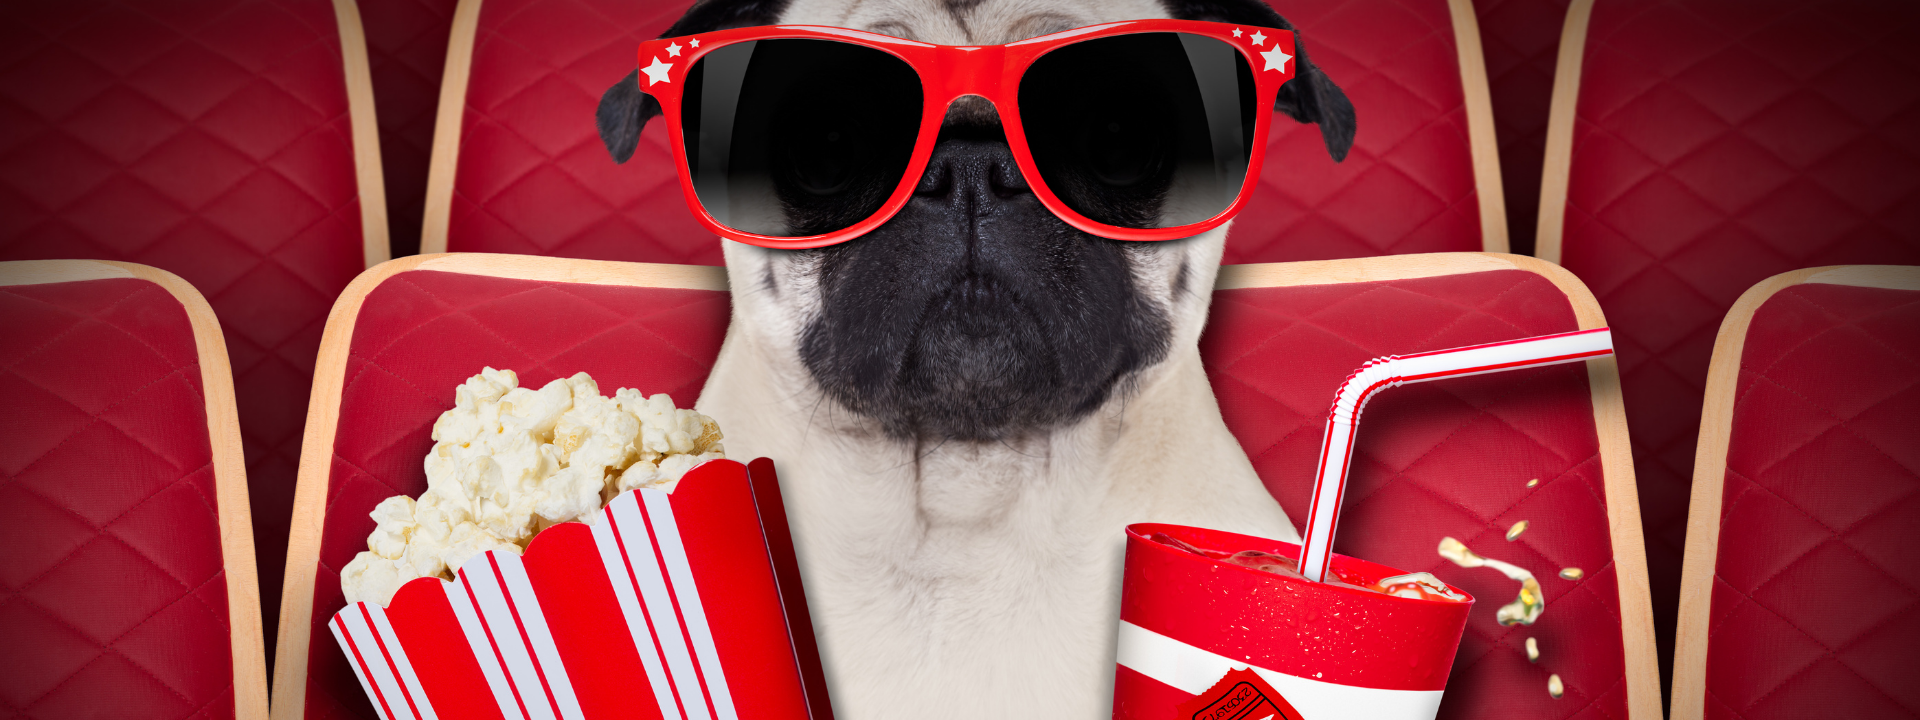 Dog with sunglasses holding popcorn and drink watching movie